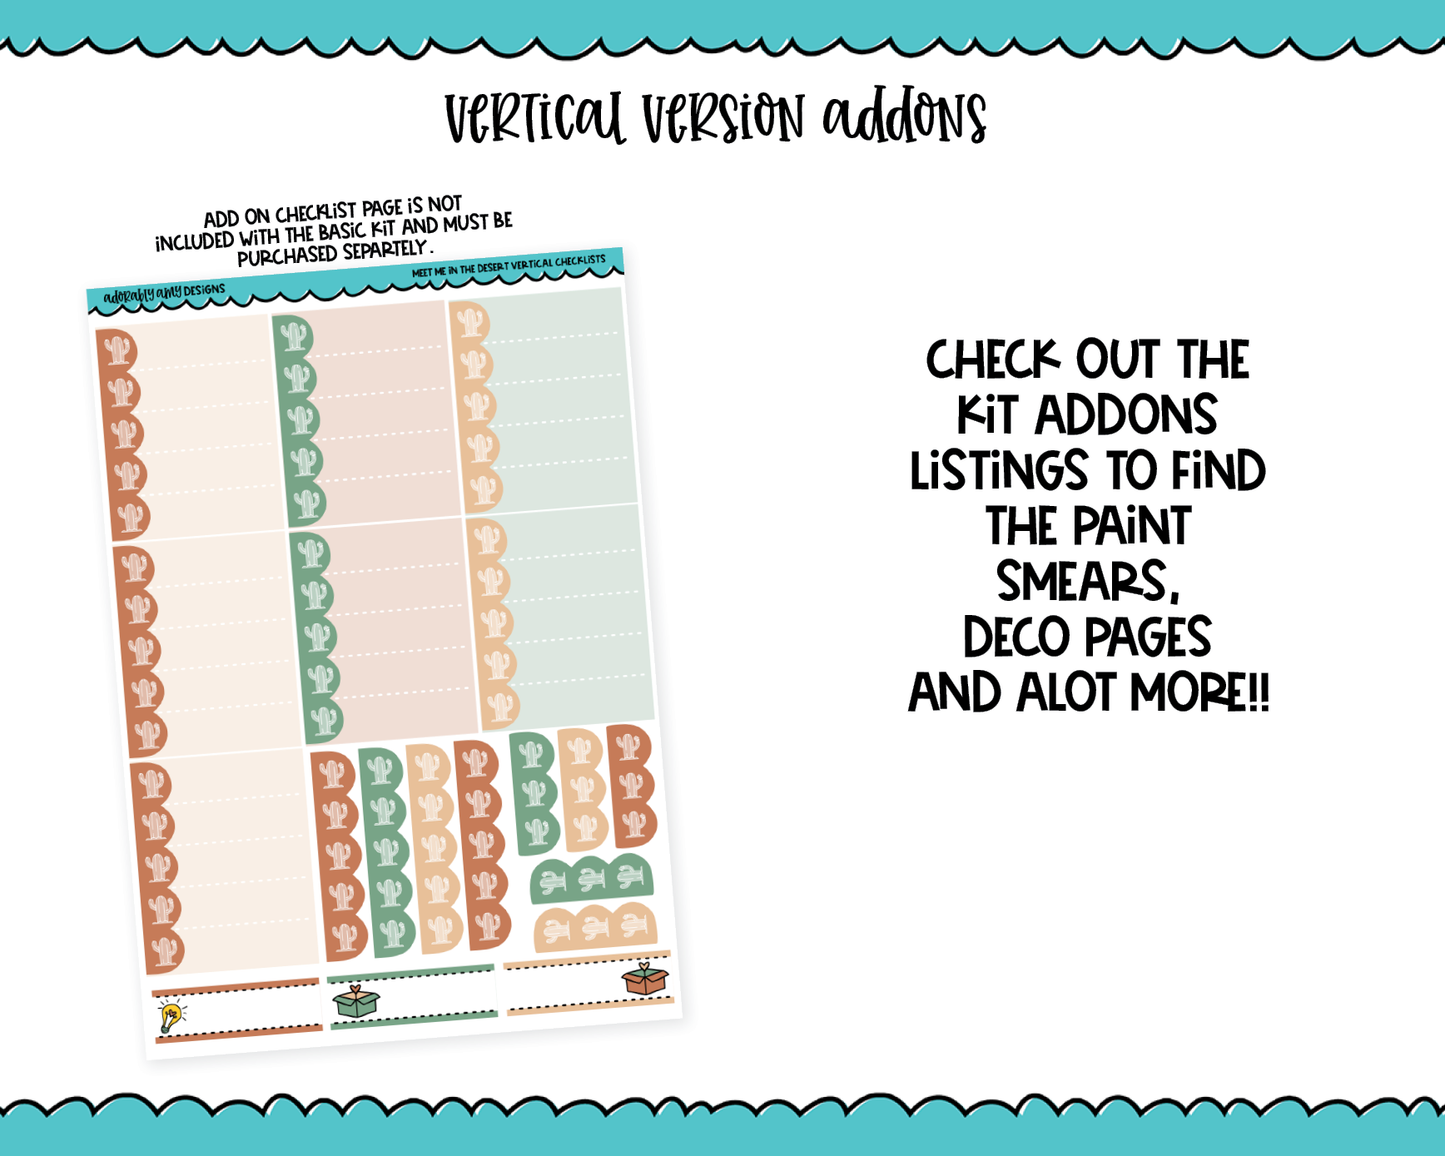 Vertical Meet Me in the Desert Themed Planner Sticker Kit for Vertical Standard Size Planners or Inserts